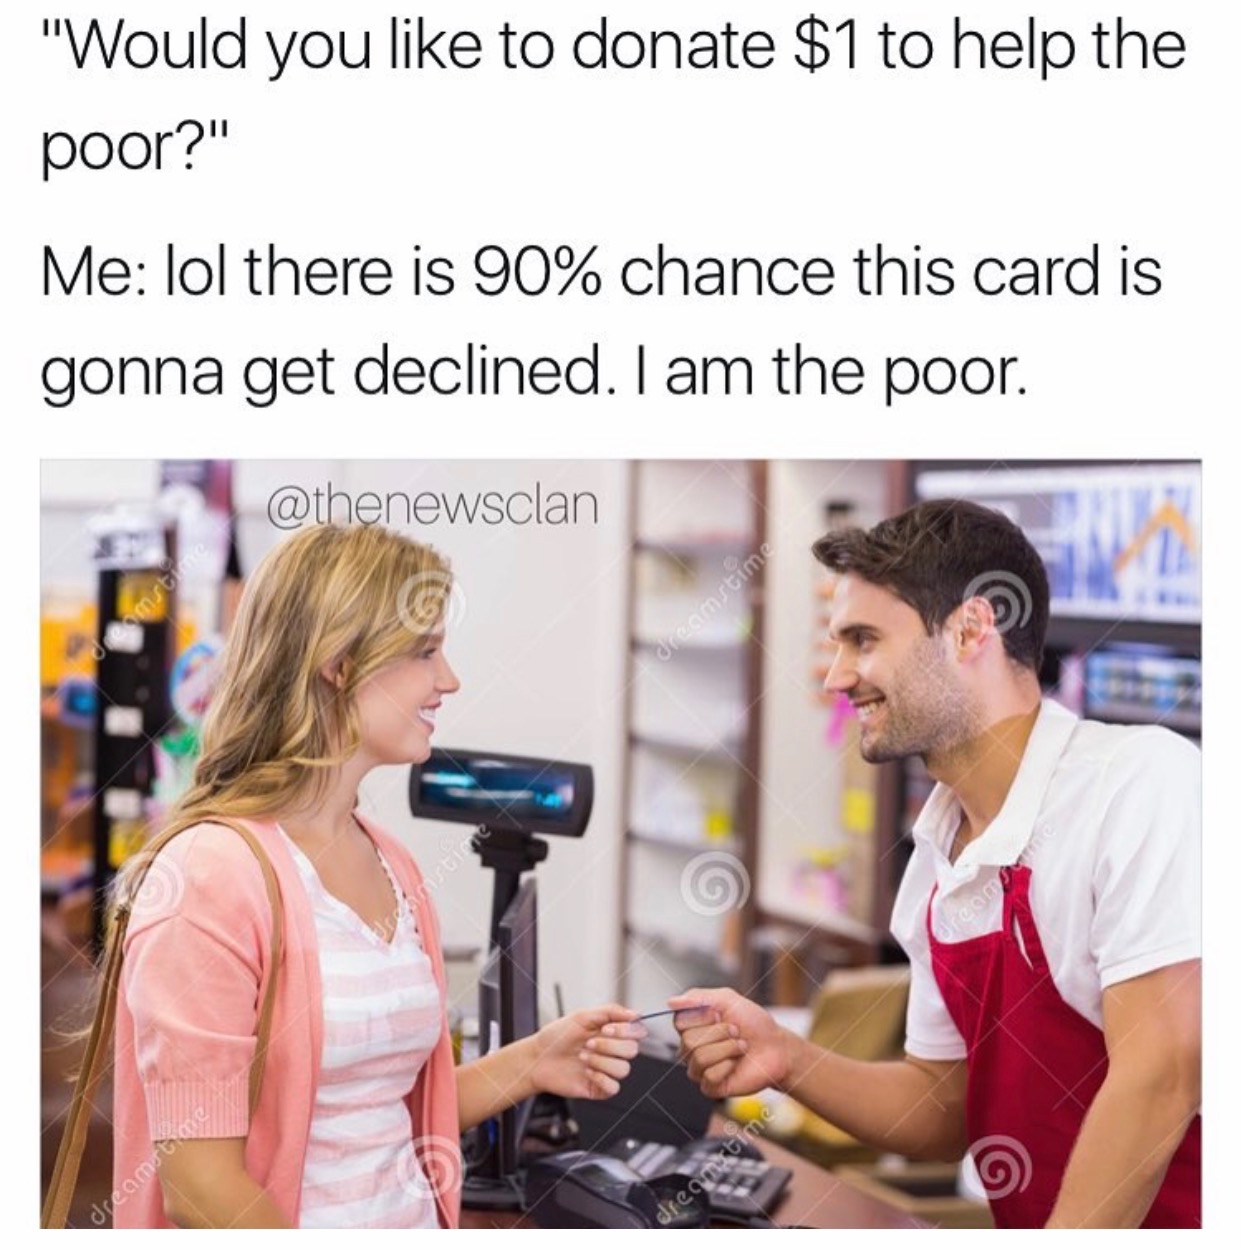 memes - carding memes - "Would you to donate $1 to help the poor?" Me lol there is 90% chance this card is gonna get declined. I am the poor. dreamstime dreamta dreamstime